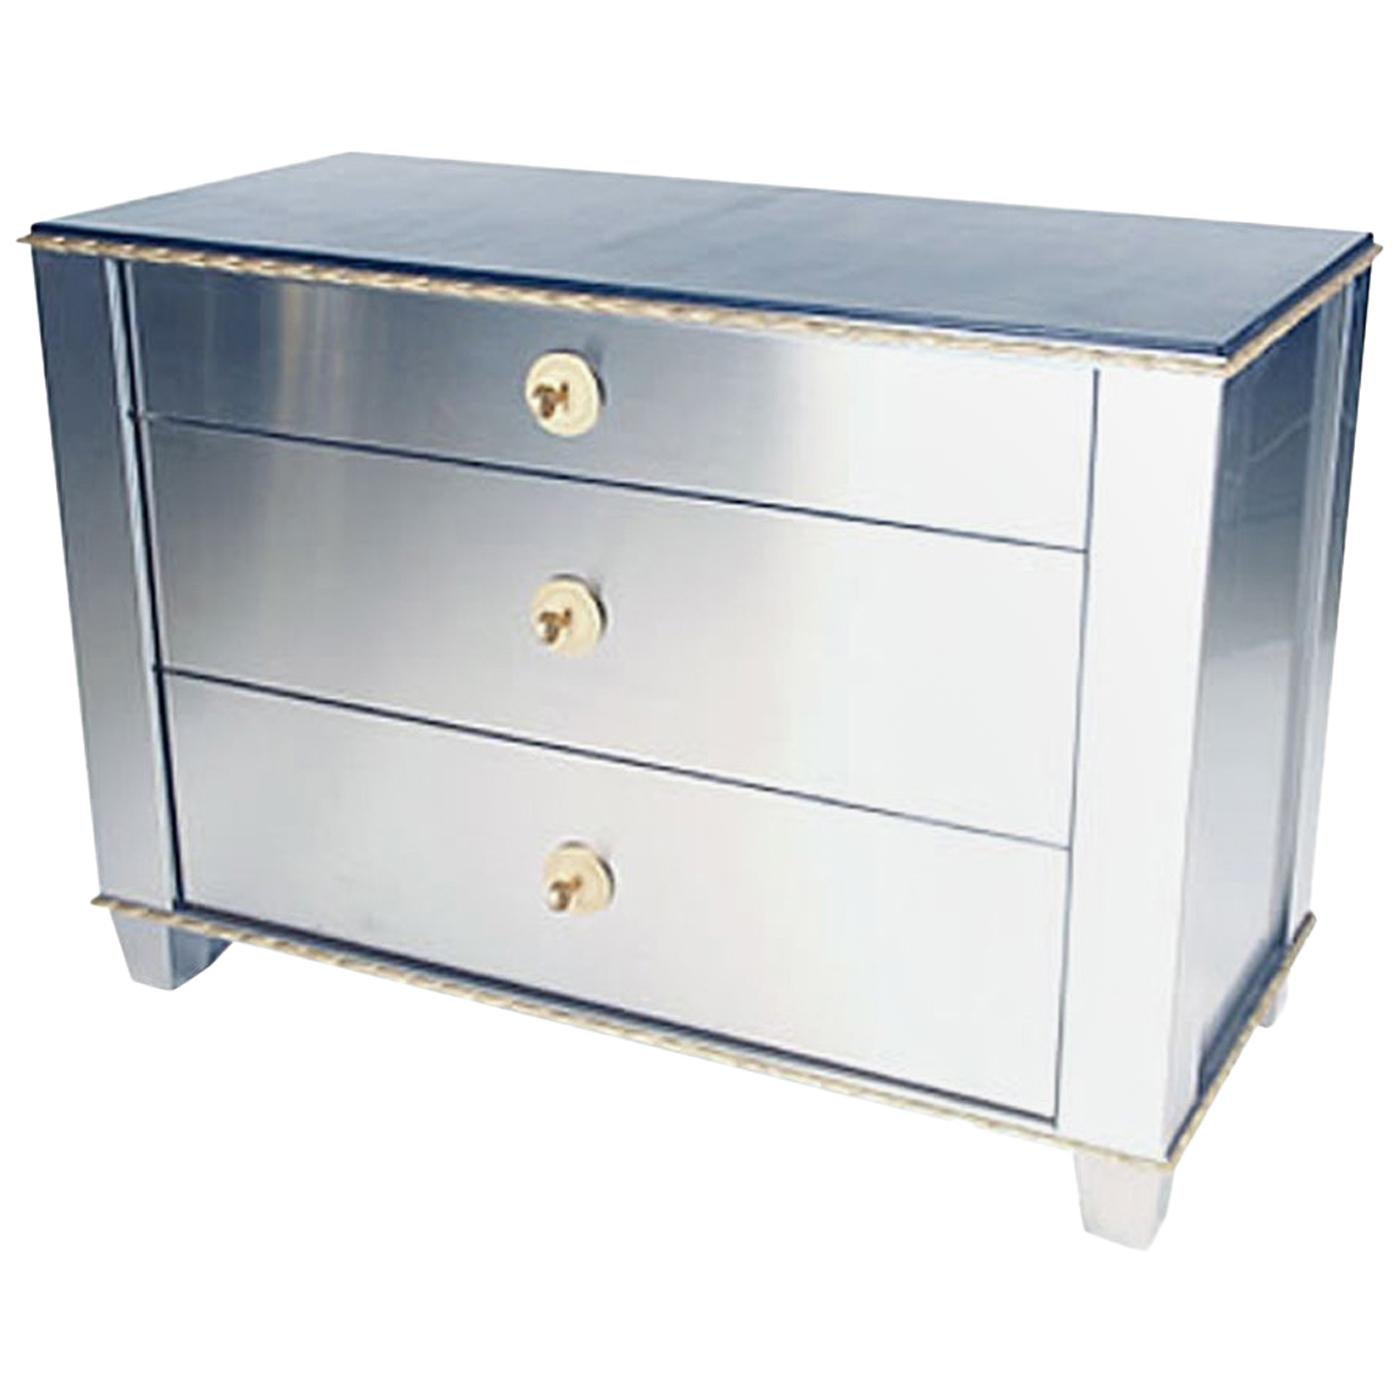 Wonderful Lorin Marsh Jansen Stainless Steel Leather Top Bronze Chest Cabinet For Sale